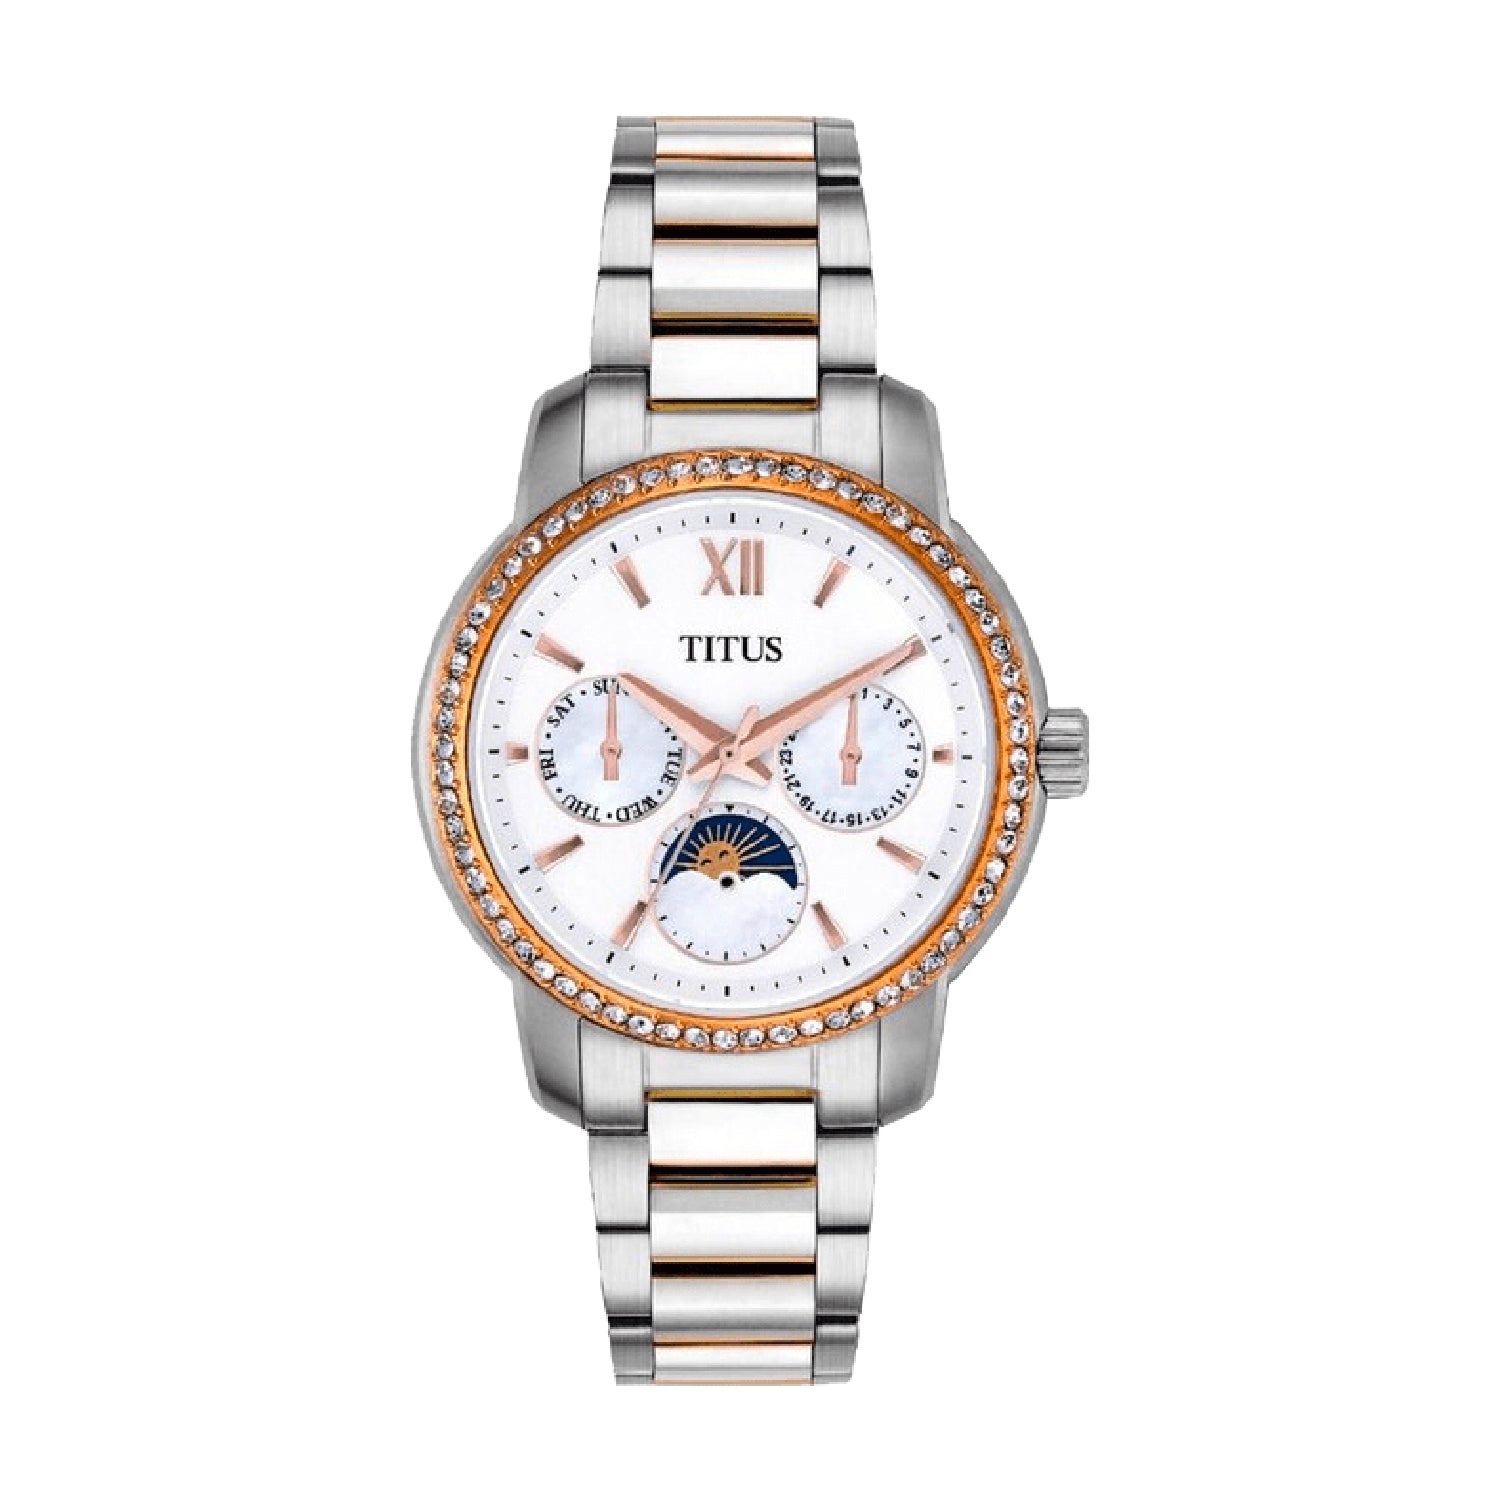 Devot Multi-Function with Day Night Indicator Quartz Stainless Steel Women Watch W06-03262-002